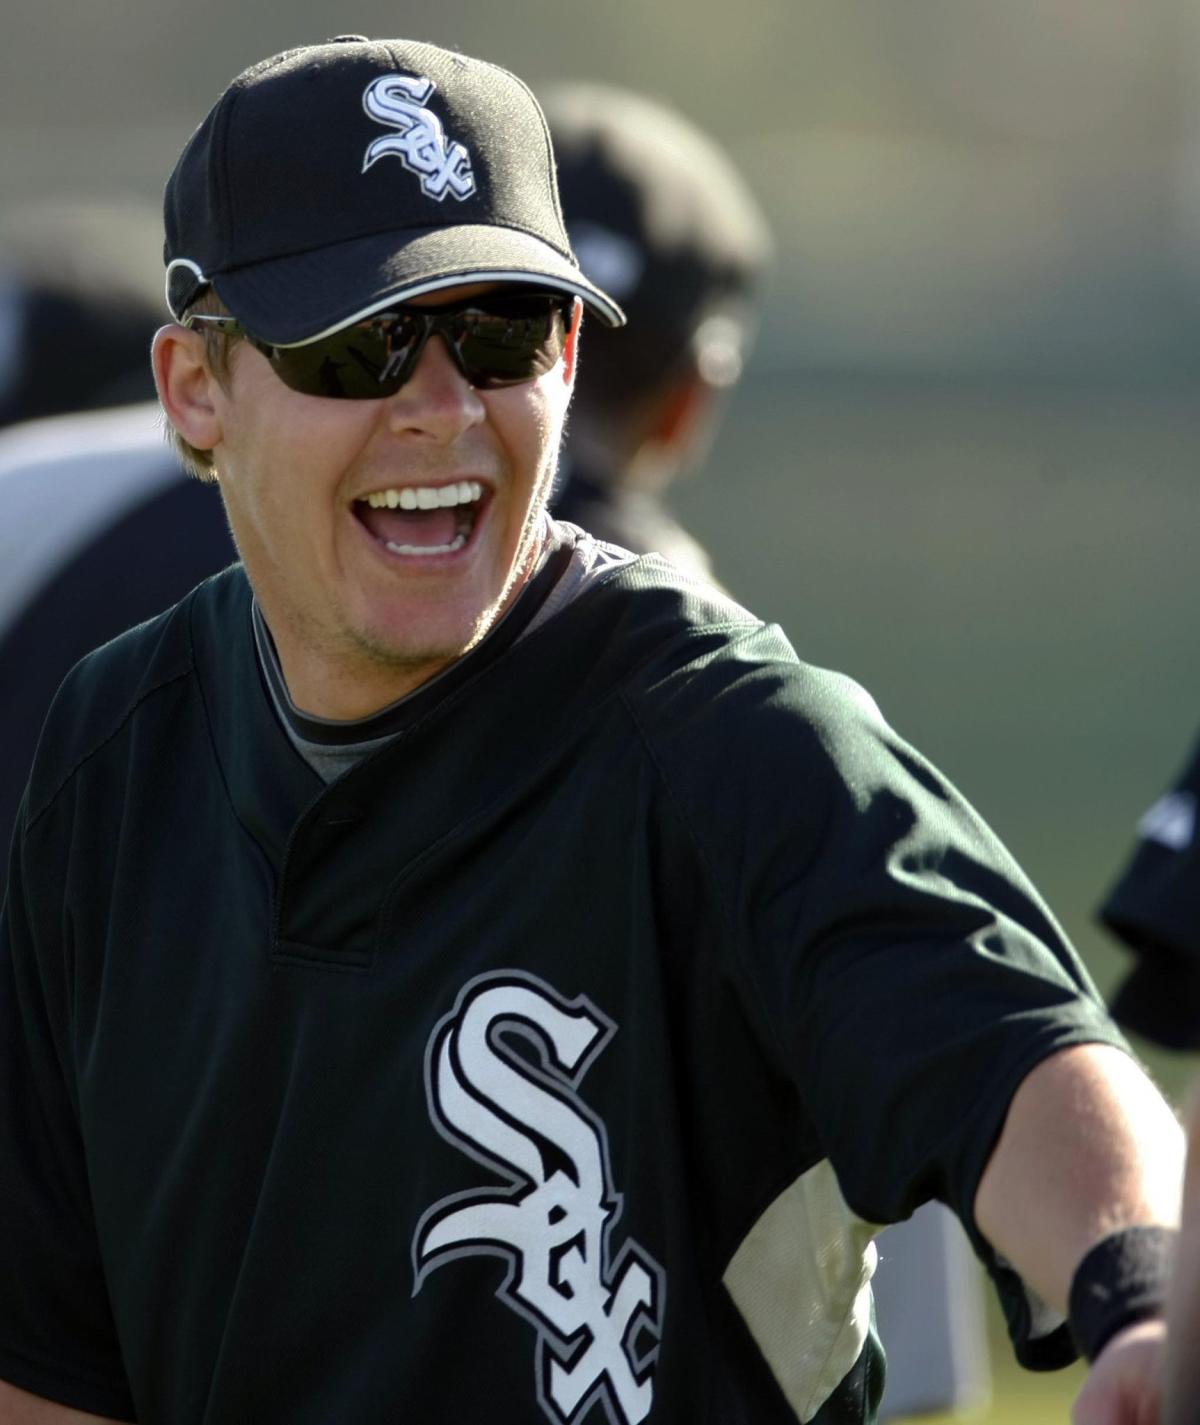 Chicago White Sox Minor League Update: August 10, 2021 - South Side Sox